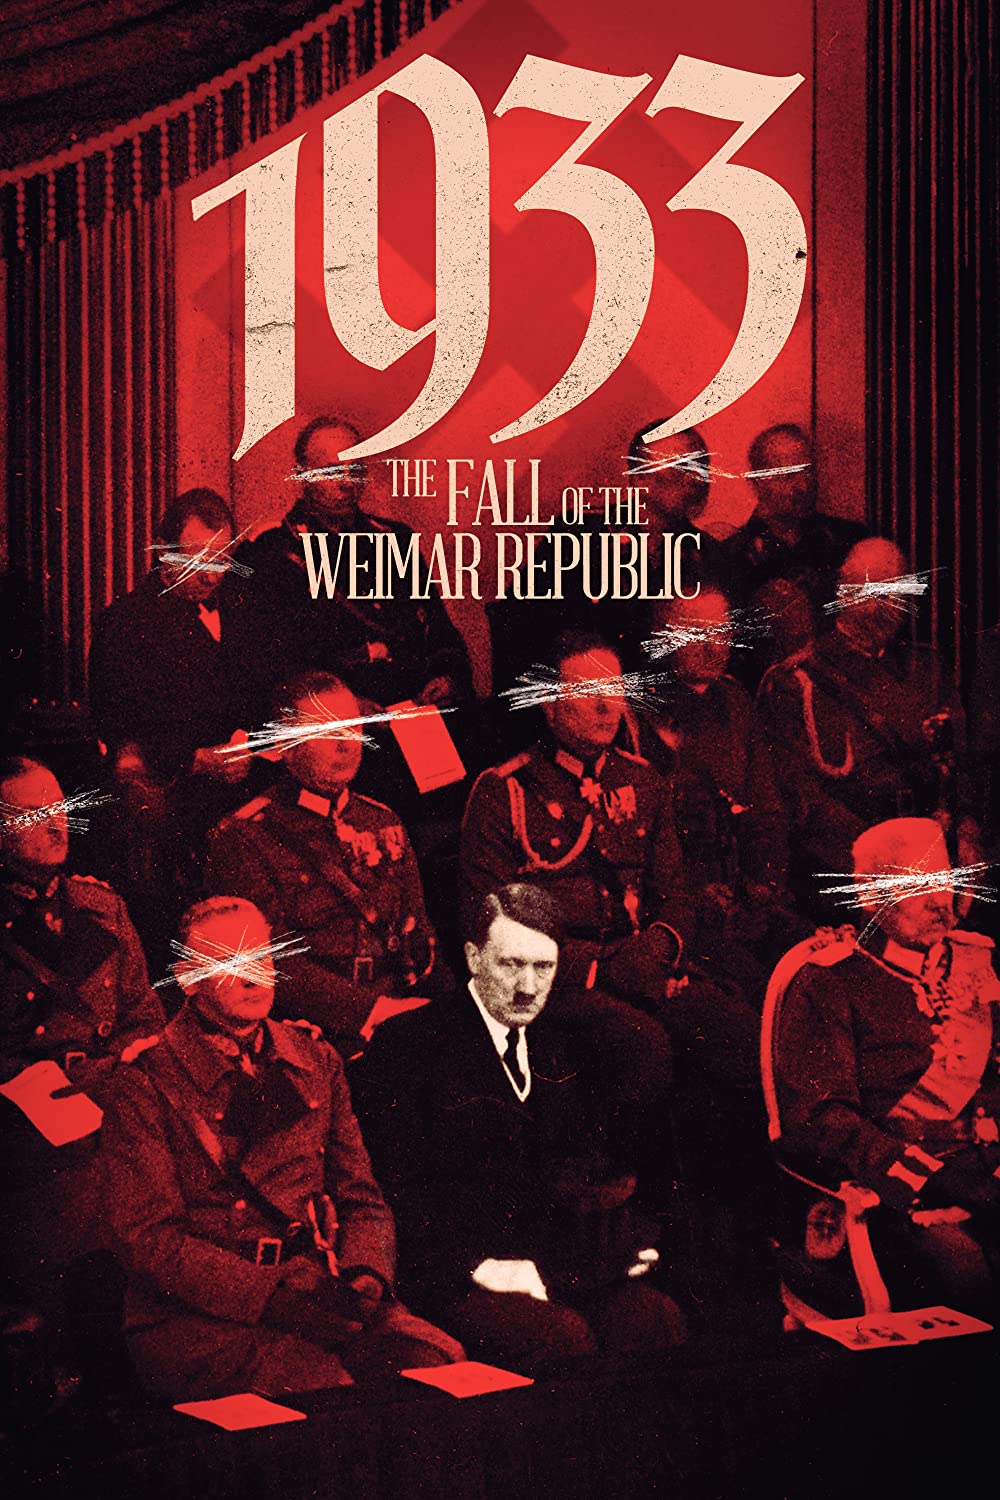     1933: The Fall of Weimar Republic